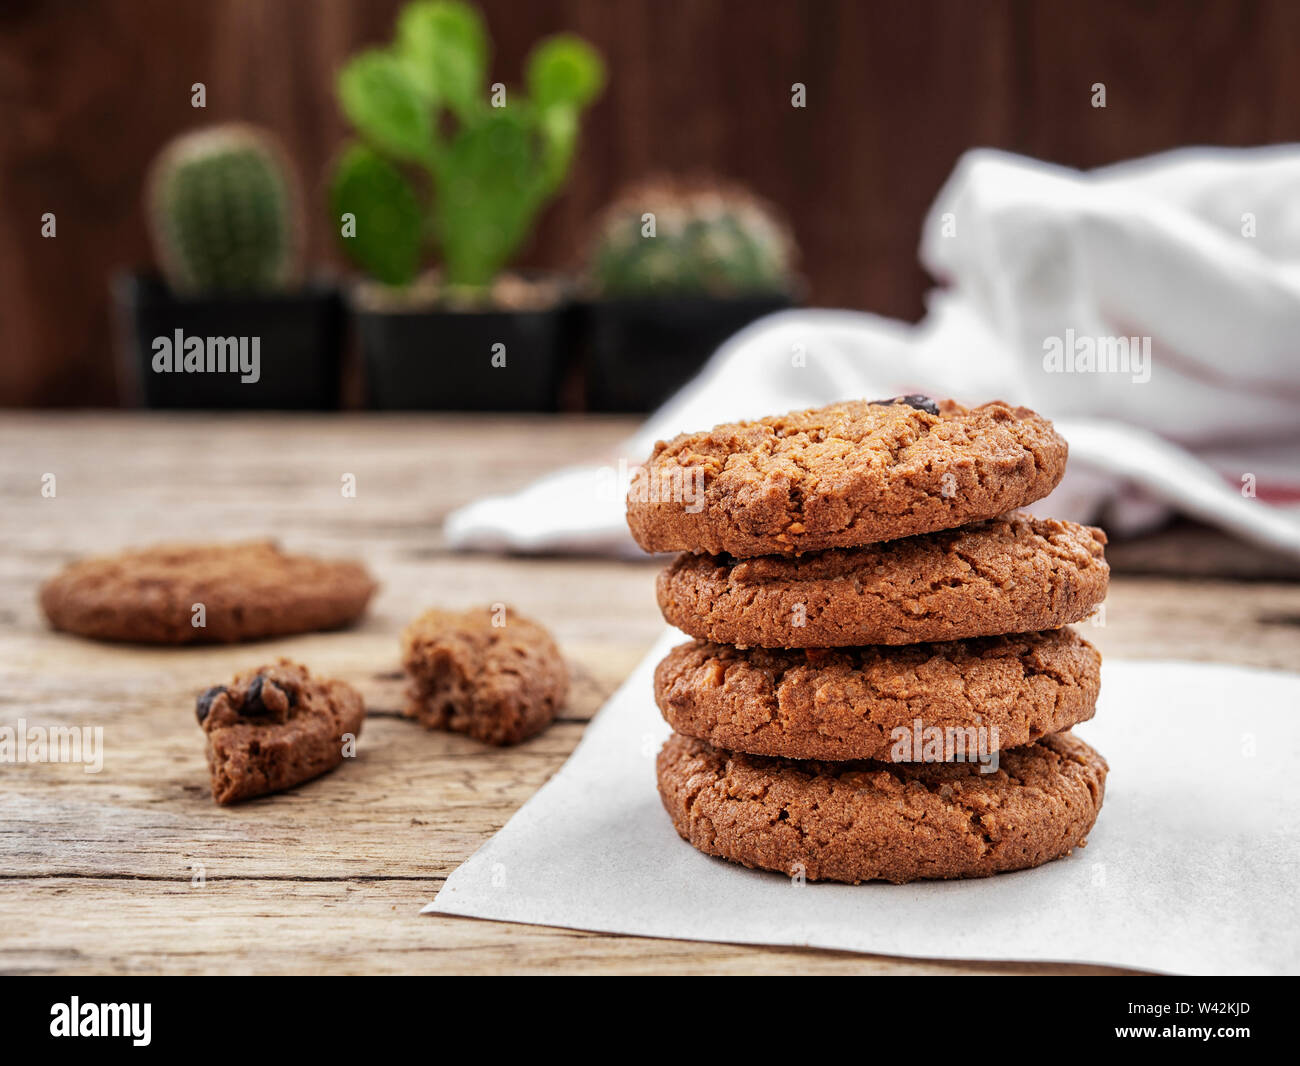 stack of chocolate chip cookies on white napkin paper on wooden table decorate with cactus at background Stock Photo